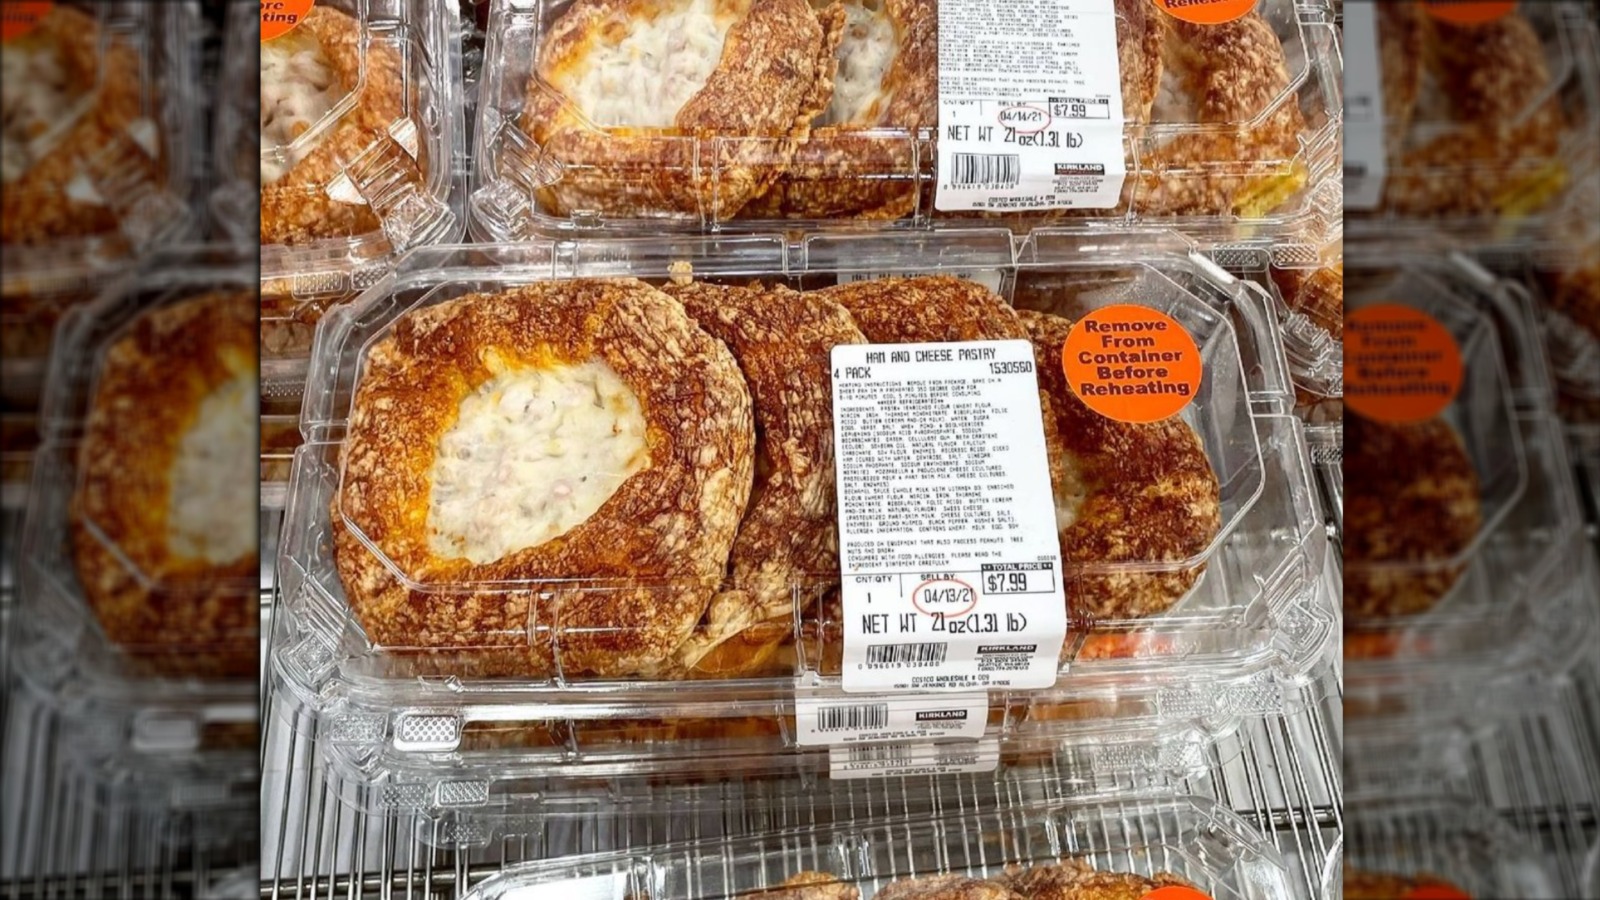 Costco Fans Can't Agree On This Ham And Cheese Pastry